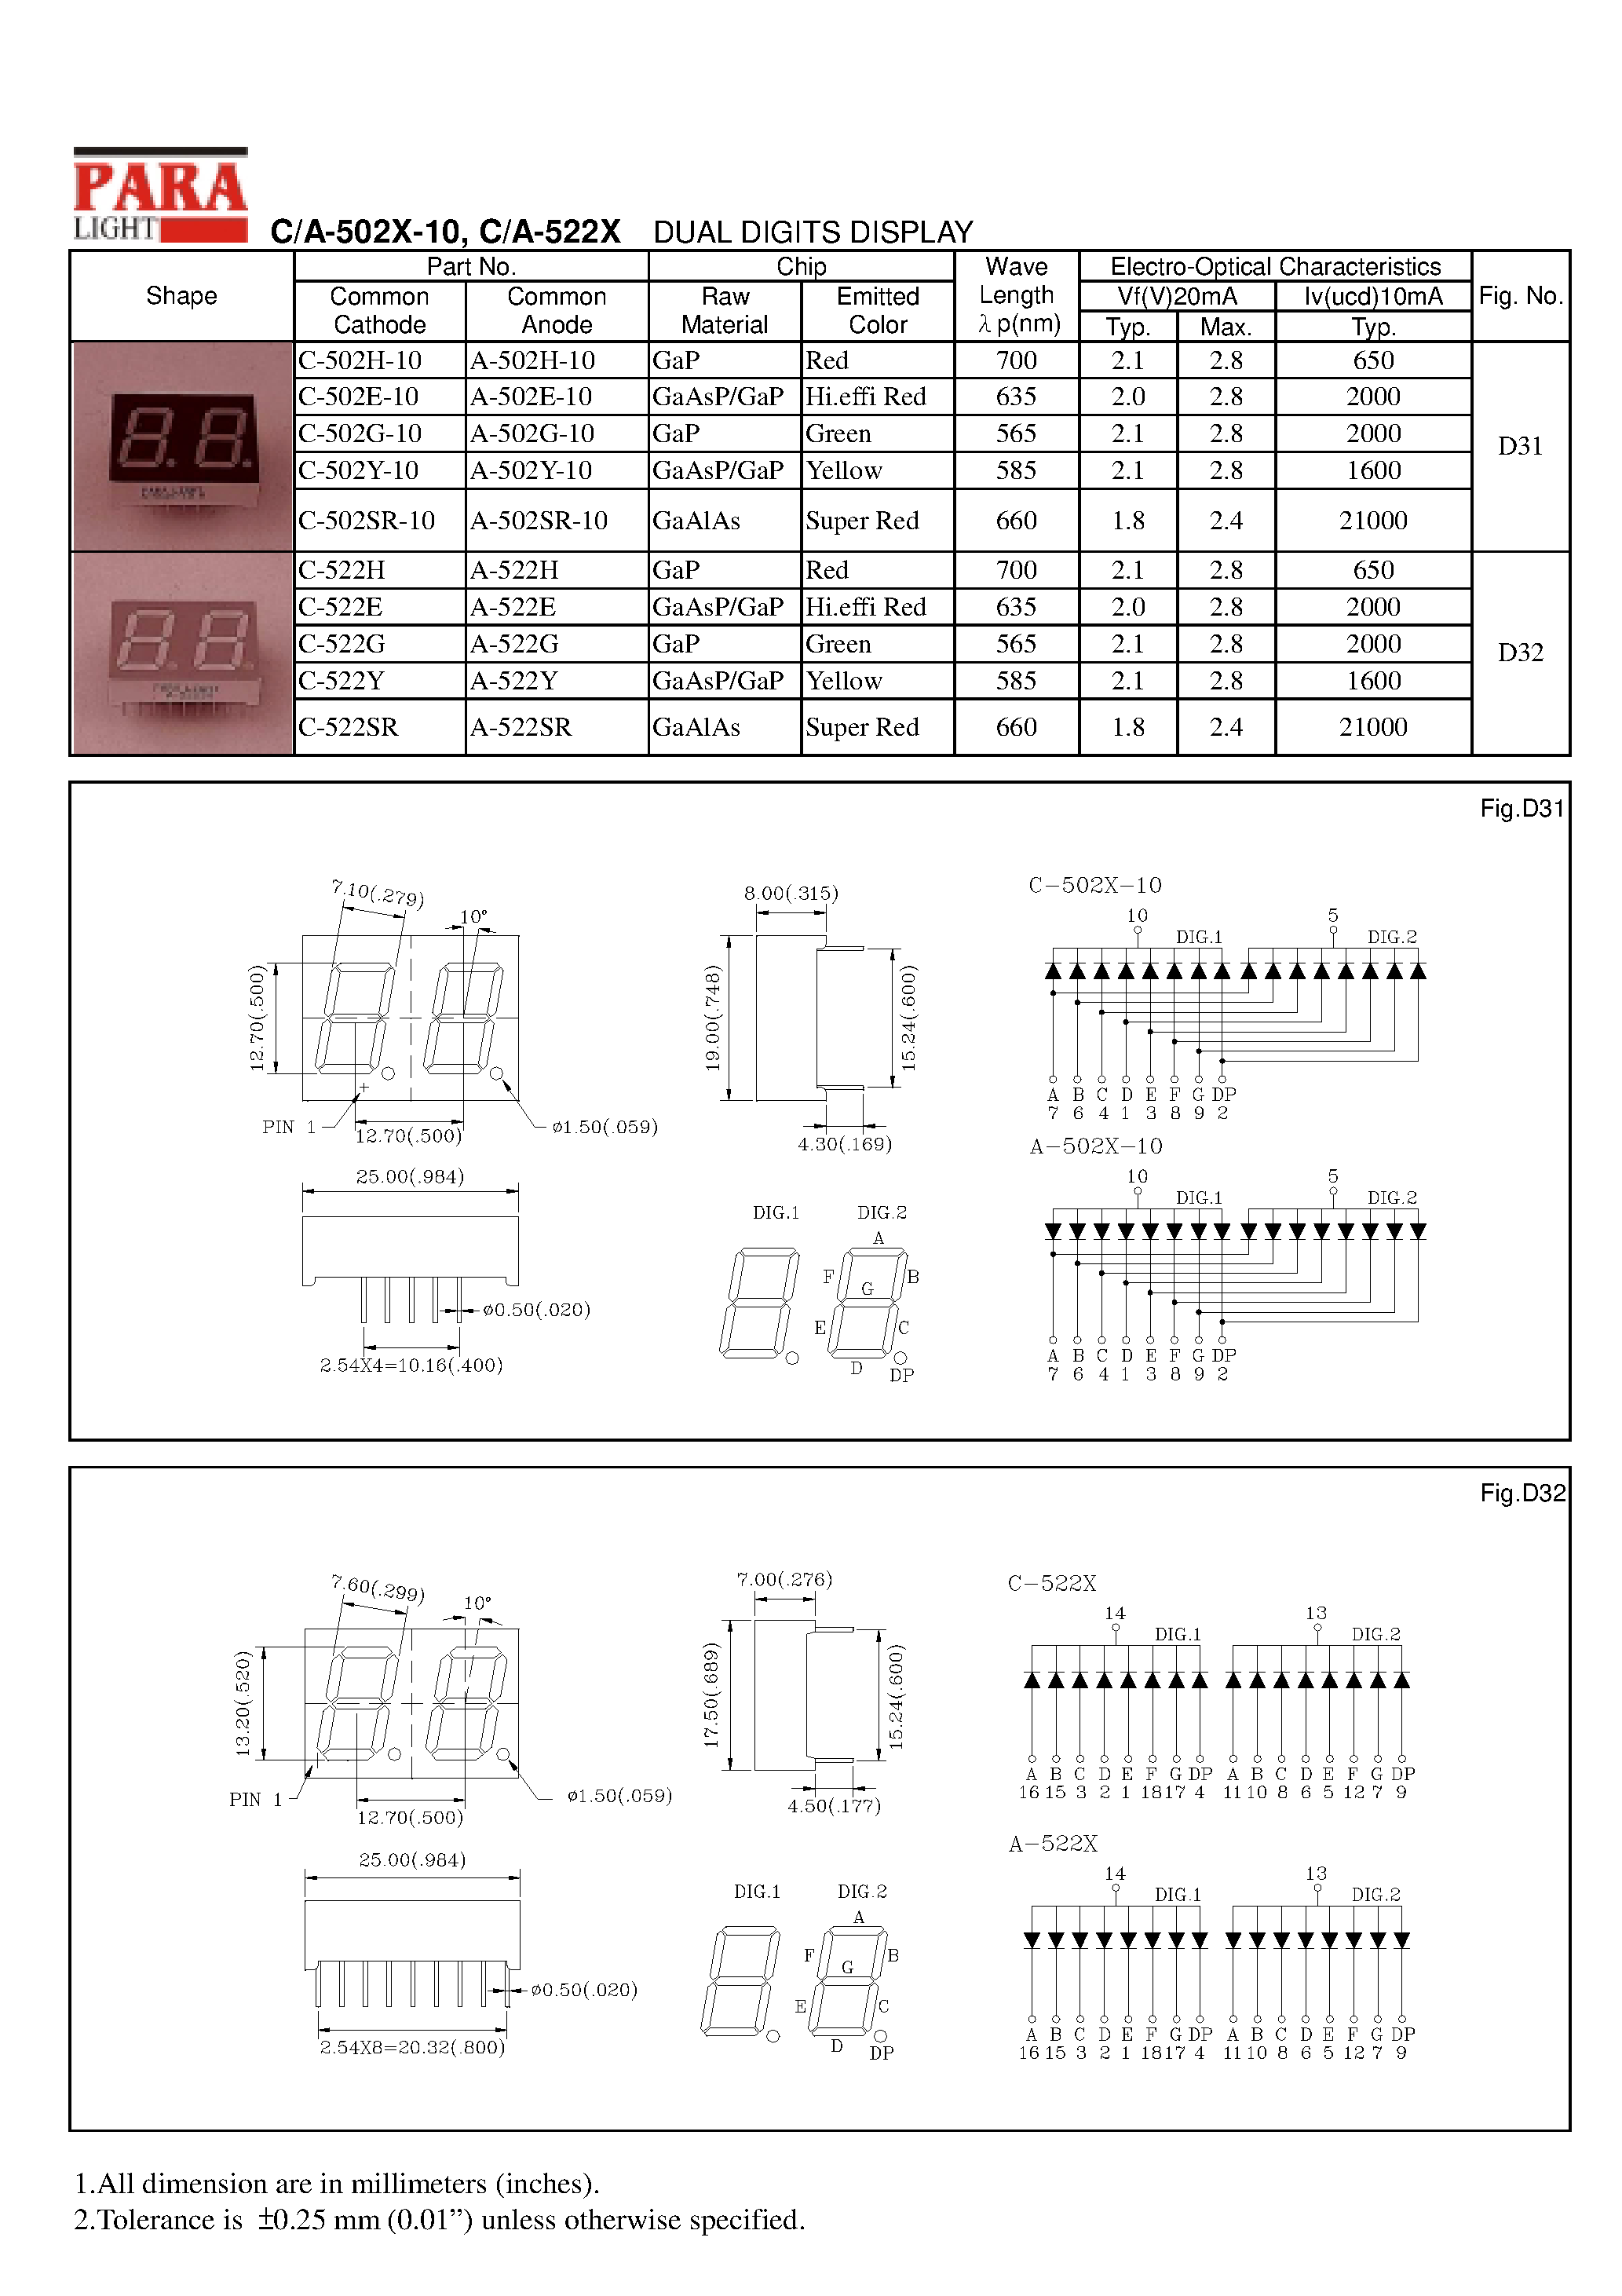 Datasheet A-522H - DUAL DIGITS DISPLAY page 1